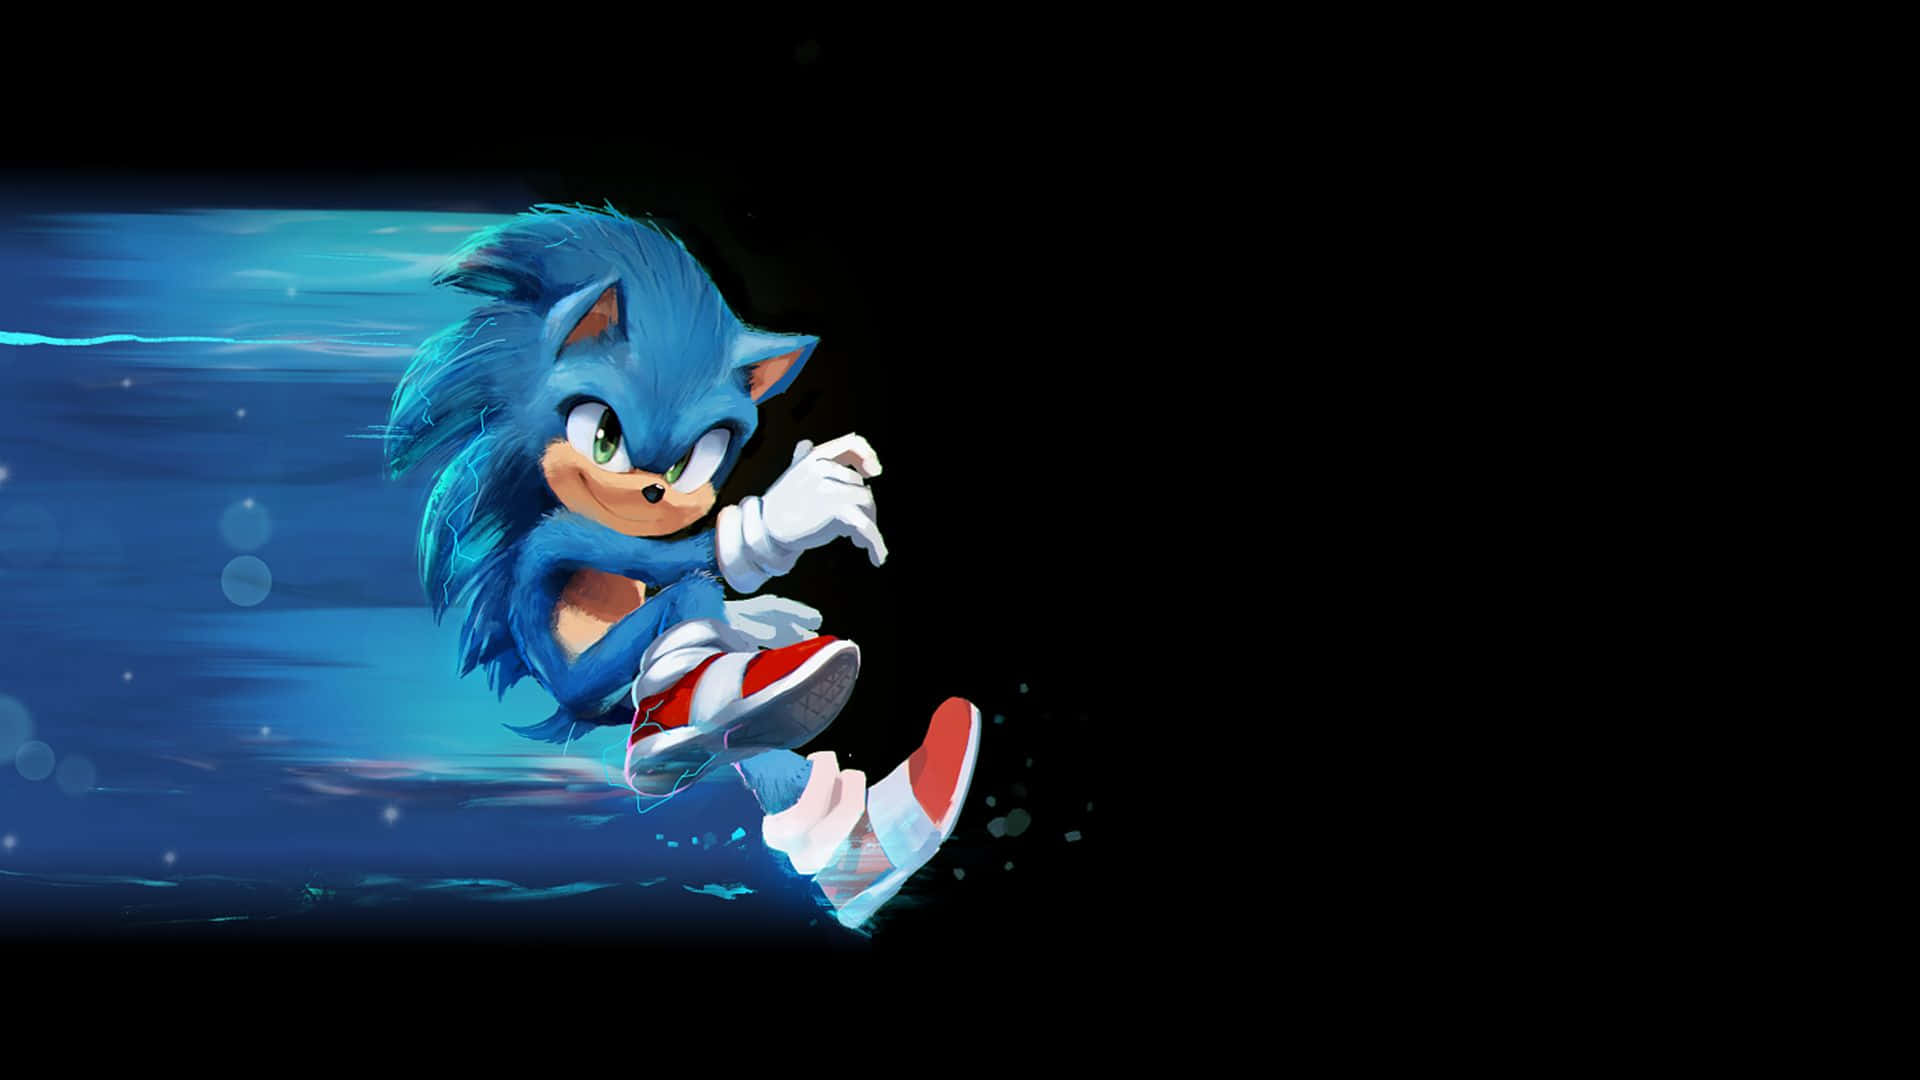 Sonic the Hedgehog and Friends in Action Wallpaper